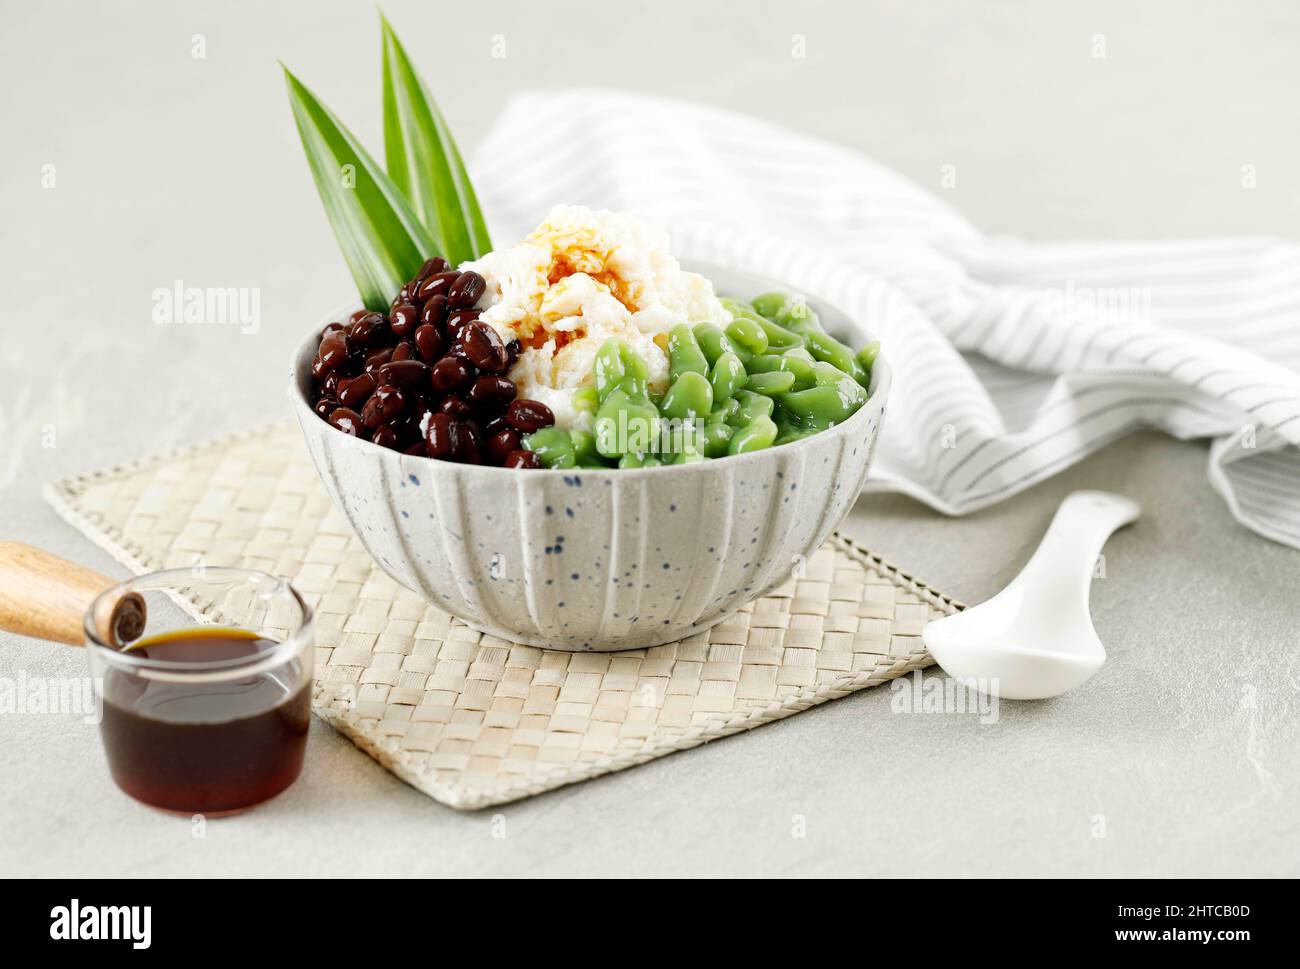 Malaysian Desserts Called Cendol .Cendol is Made From Crushed Ice Cubes, Red Bean, variety of sweets and fruits. Stock Photo